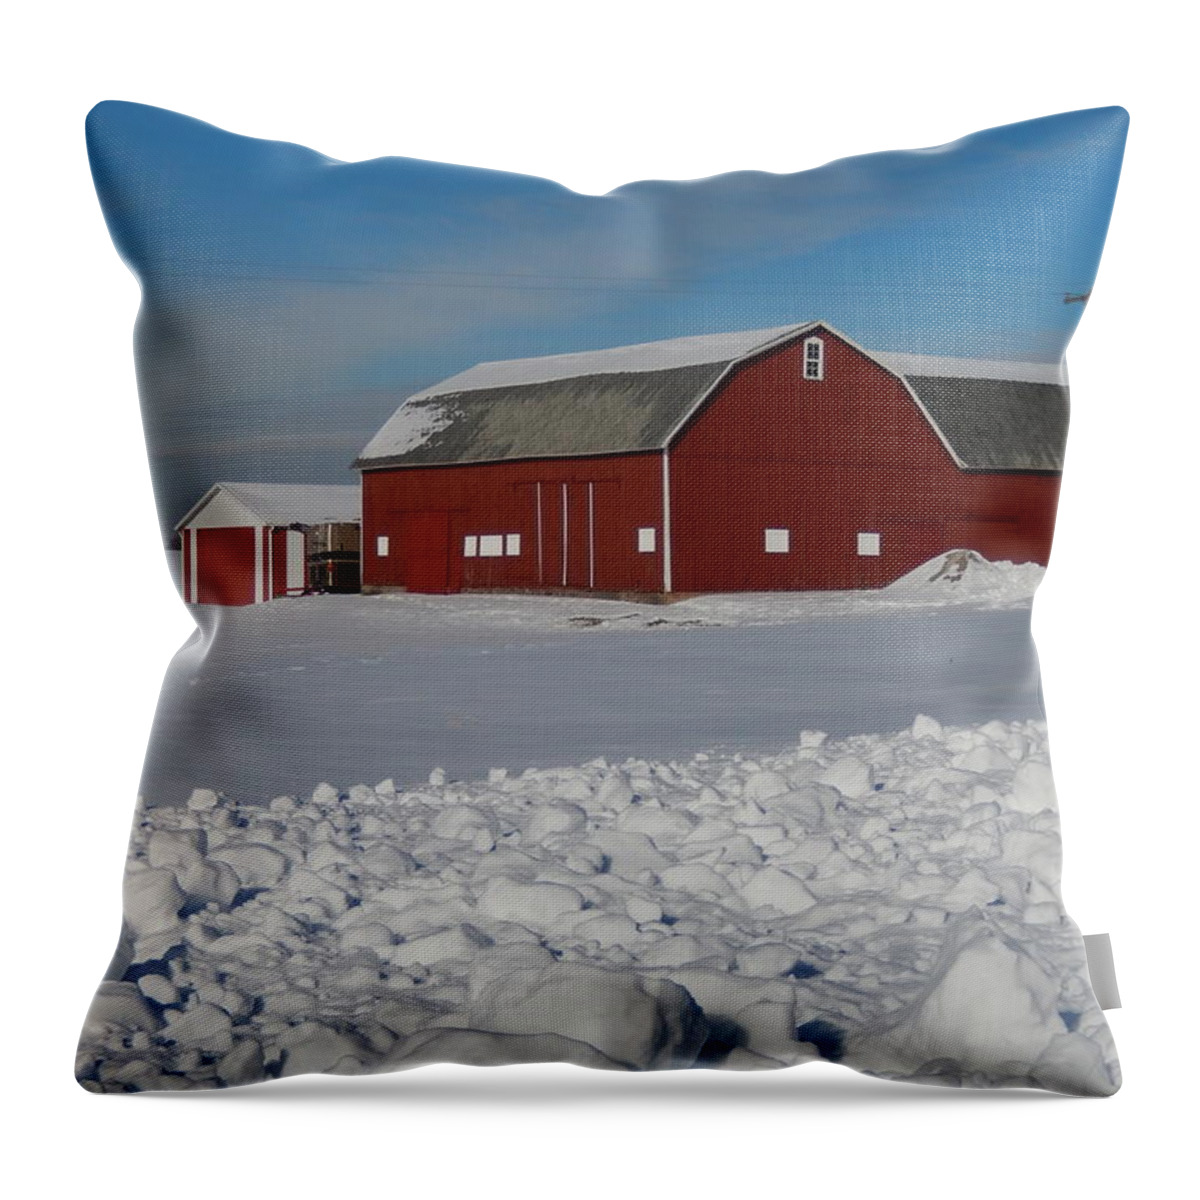 Snow Throw Pillow featuring the photograph Snowbound Red Barn by Susan Wyman